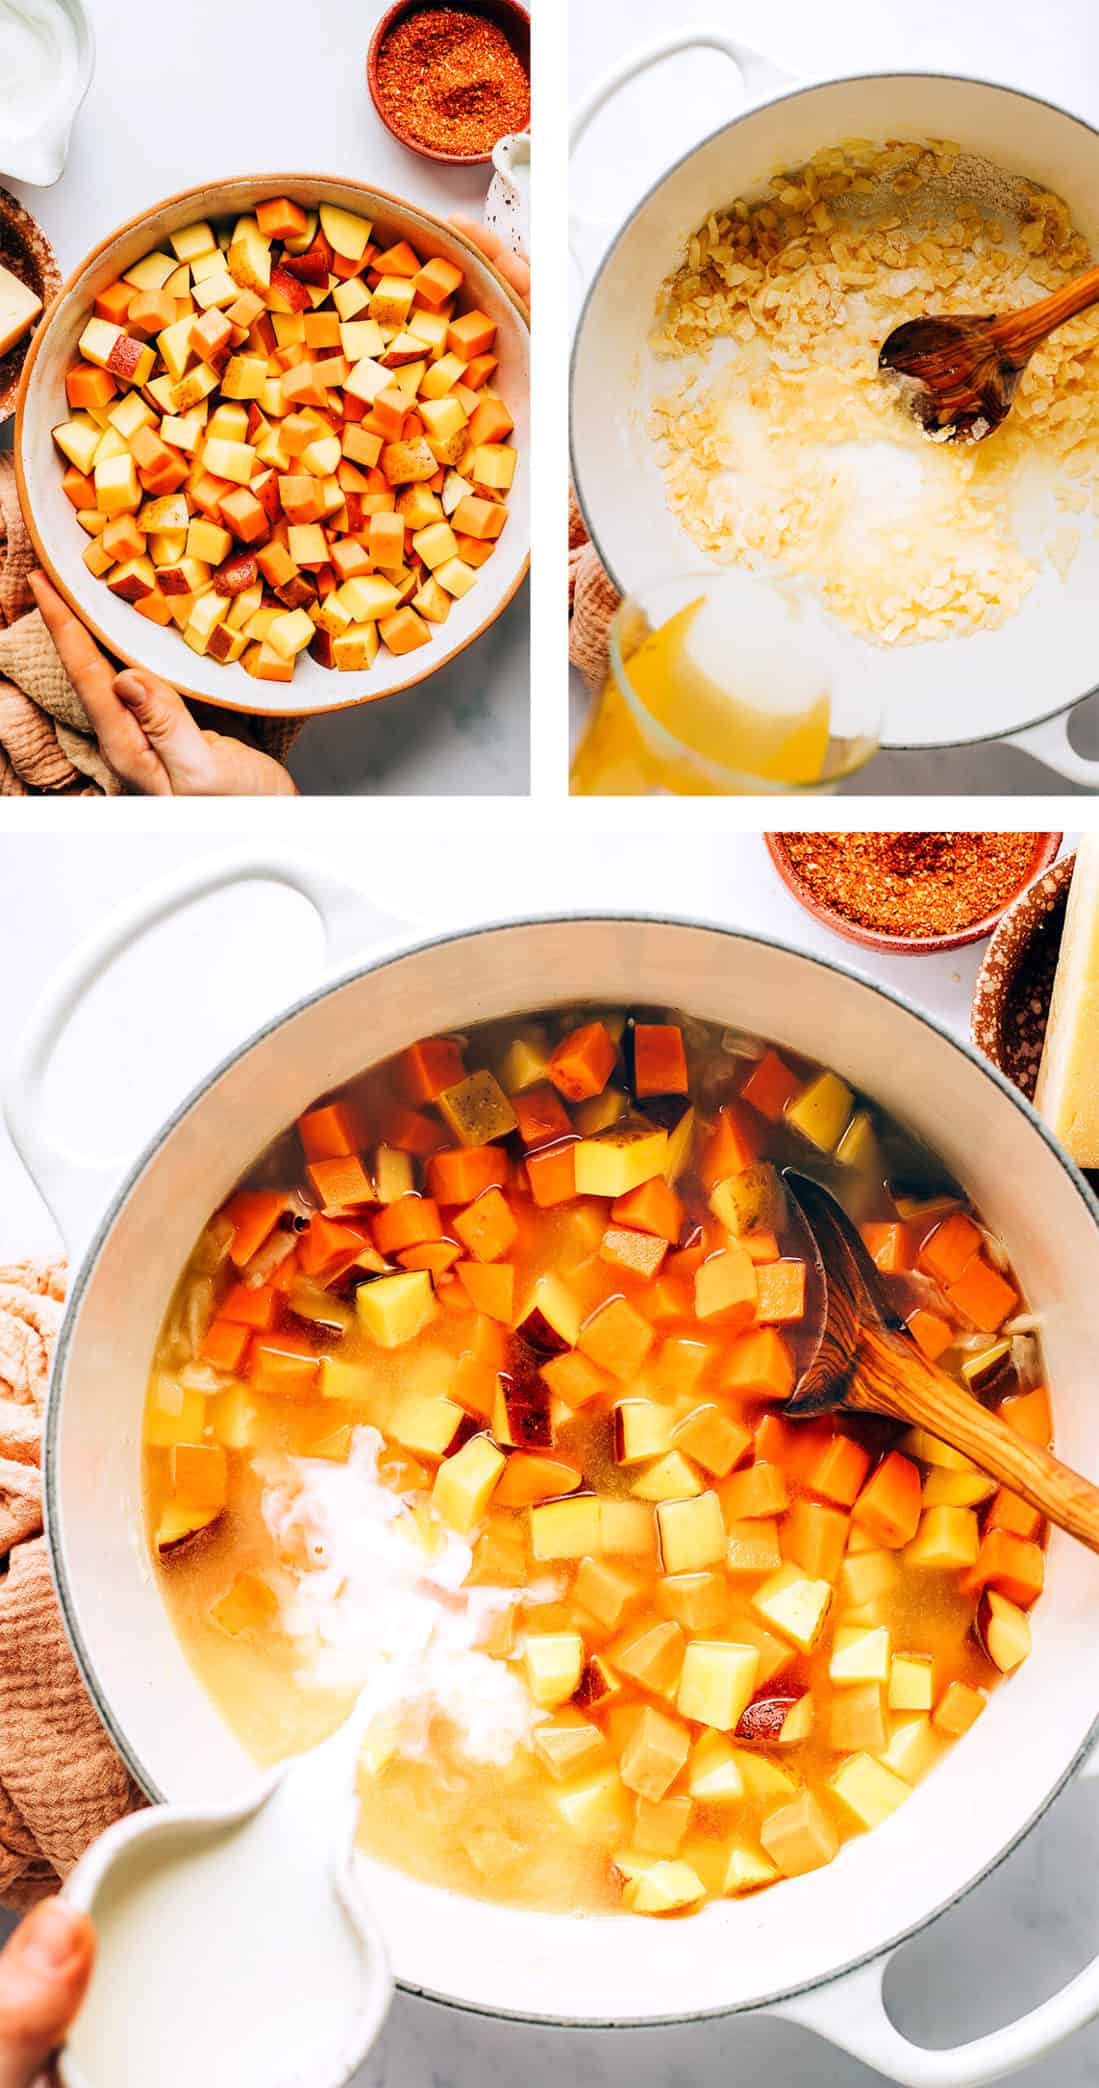 Step by step photos for how to make potato soup